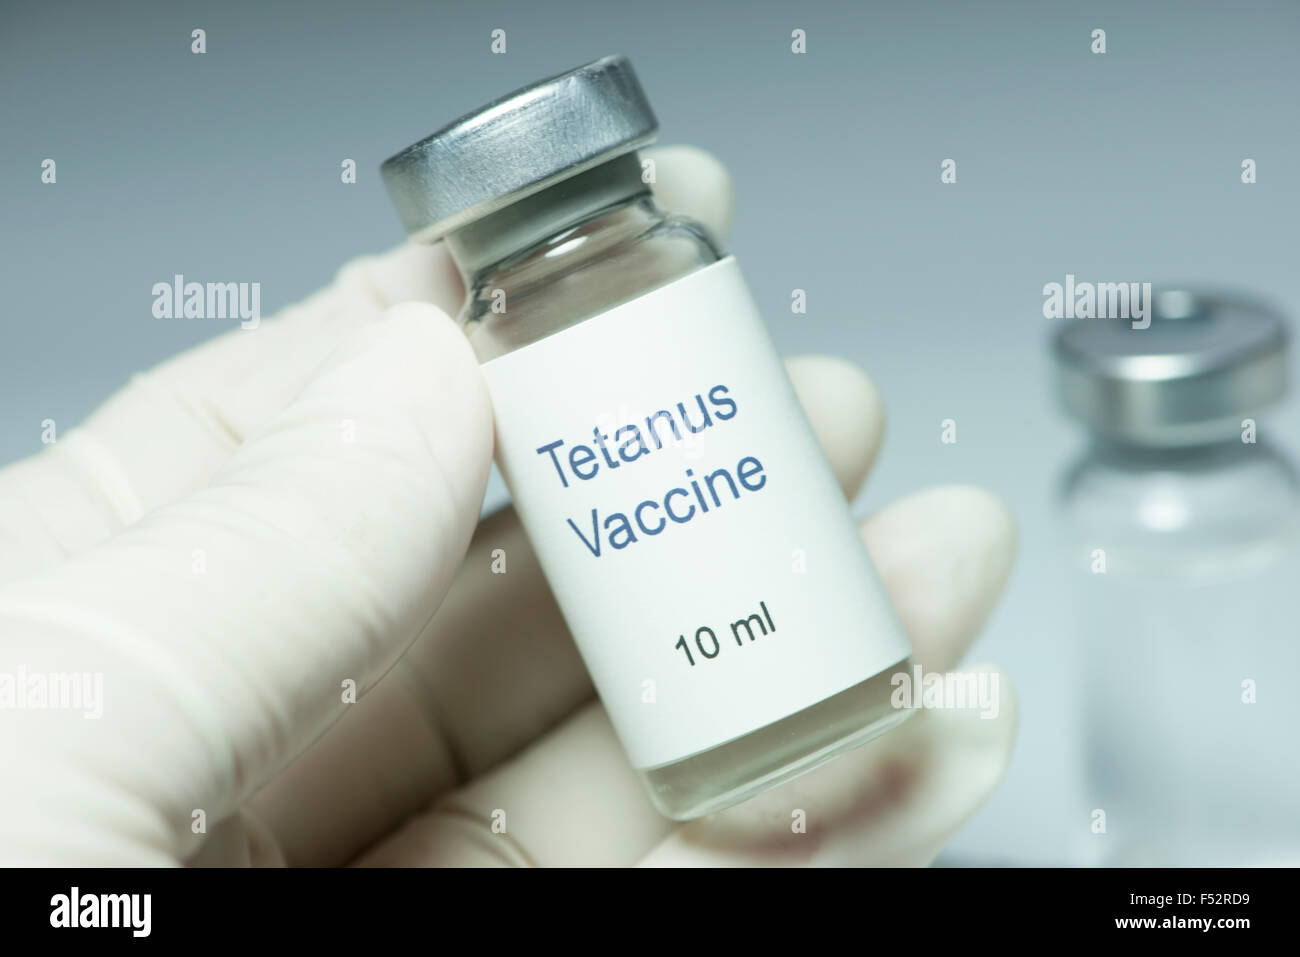 Tetanus vaccine in glass vial with gloved hand. Stock Photo